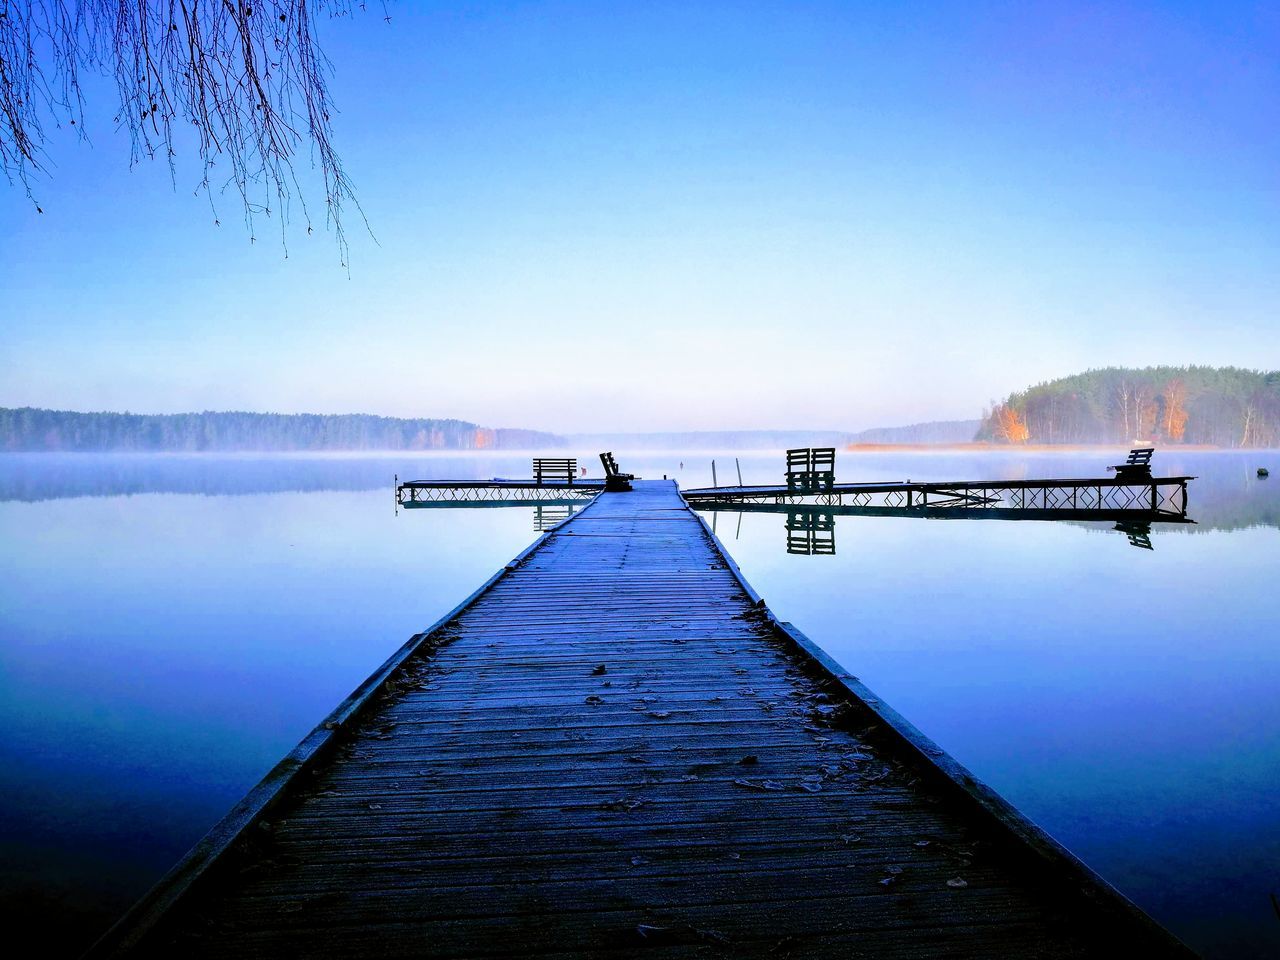 water, sky, pier, tranquil scene, nature, scenics - nature, the way forward, wood - material, beauty in nature, tranquility, lake, reflection, direction, no people, jetty, blue, clear sky, day, diminishing perspective, outdoors, long